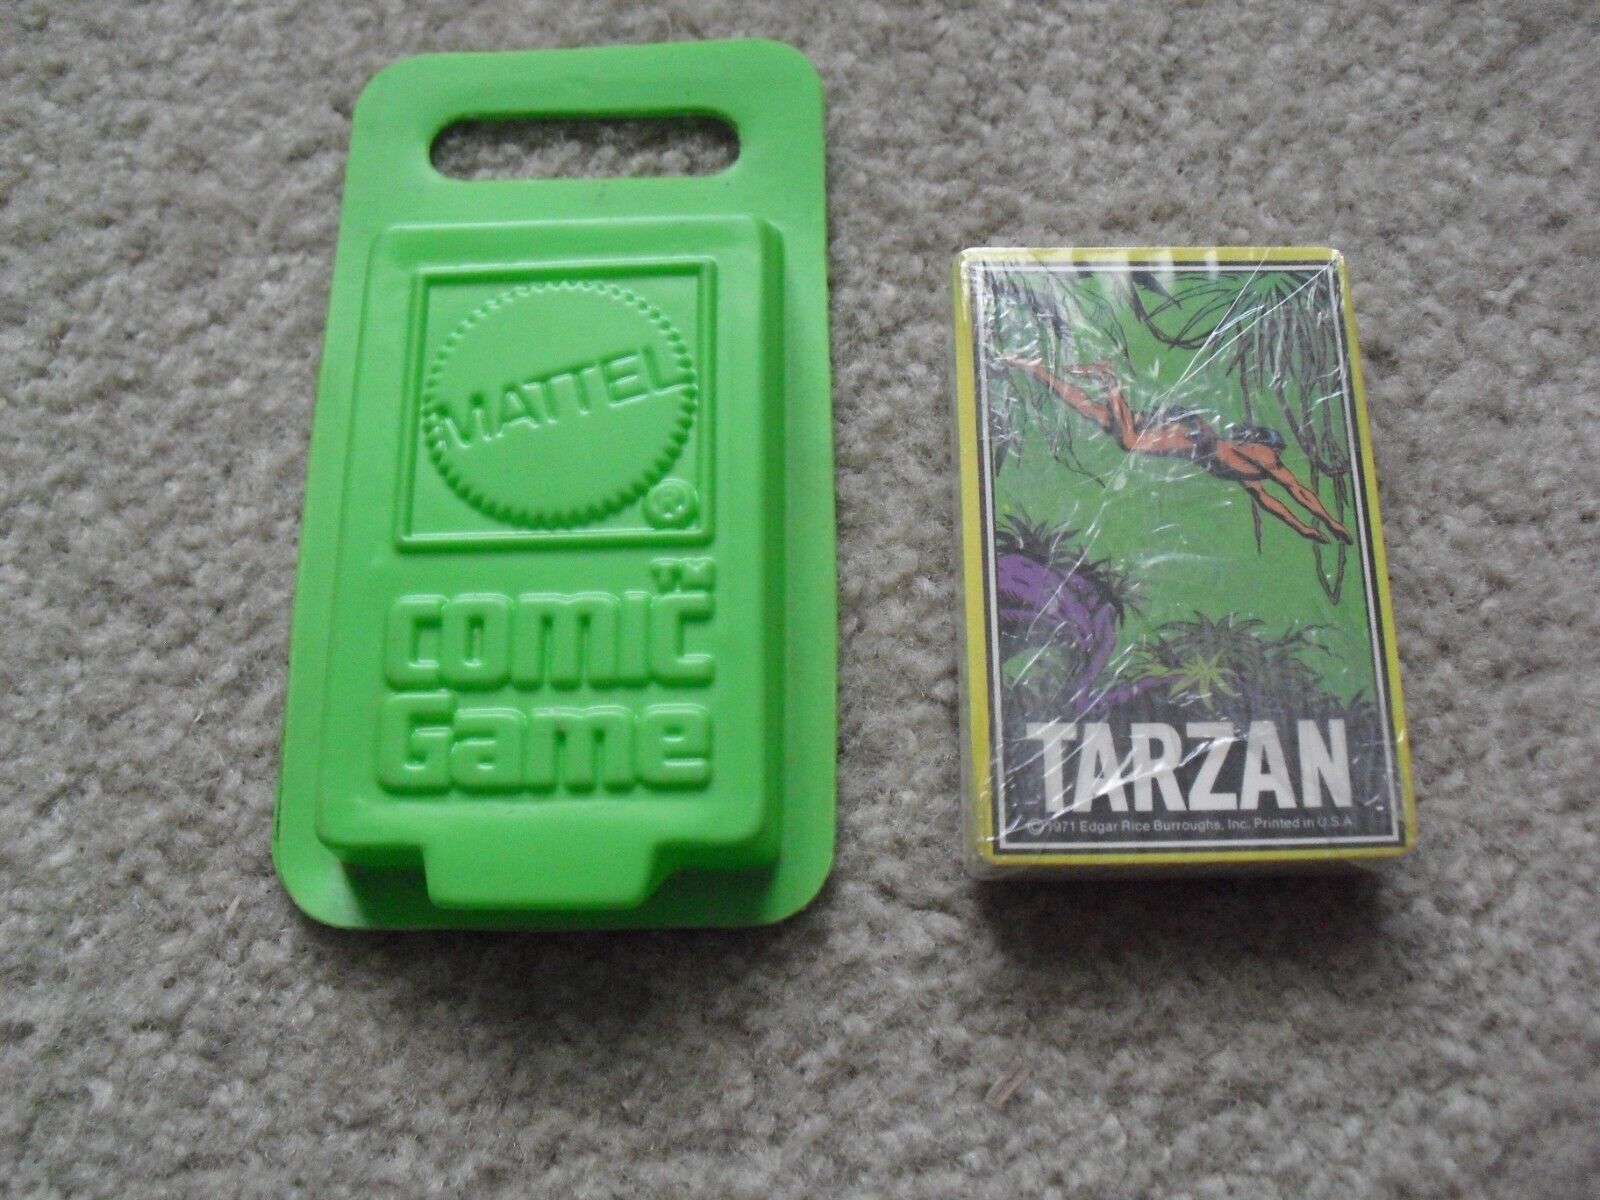 Vintage 1971 Mattel Sealed Comic Game Tarzan with Green Package 